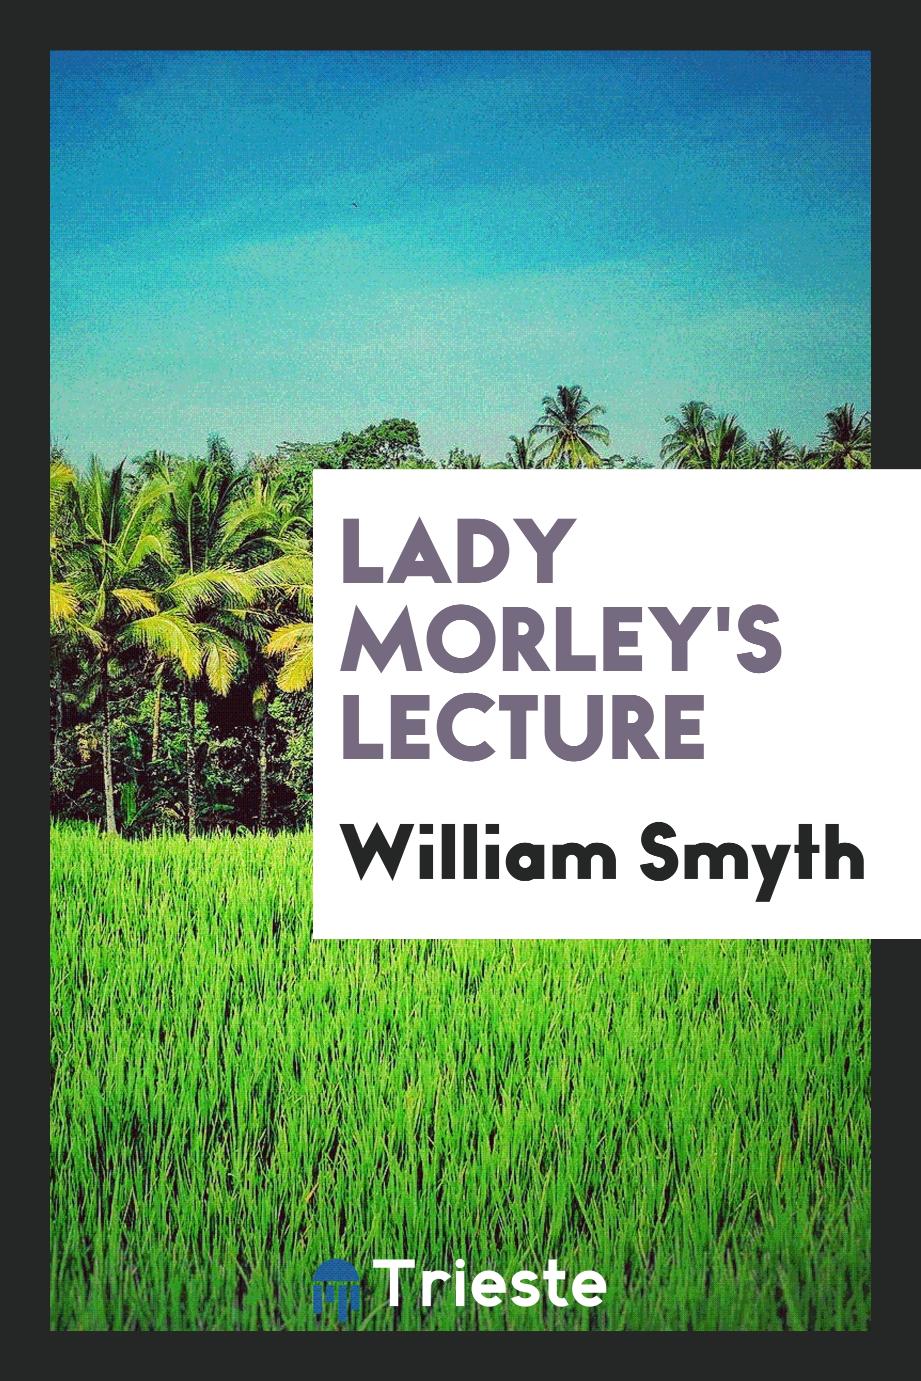 Lady Morley's lecture